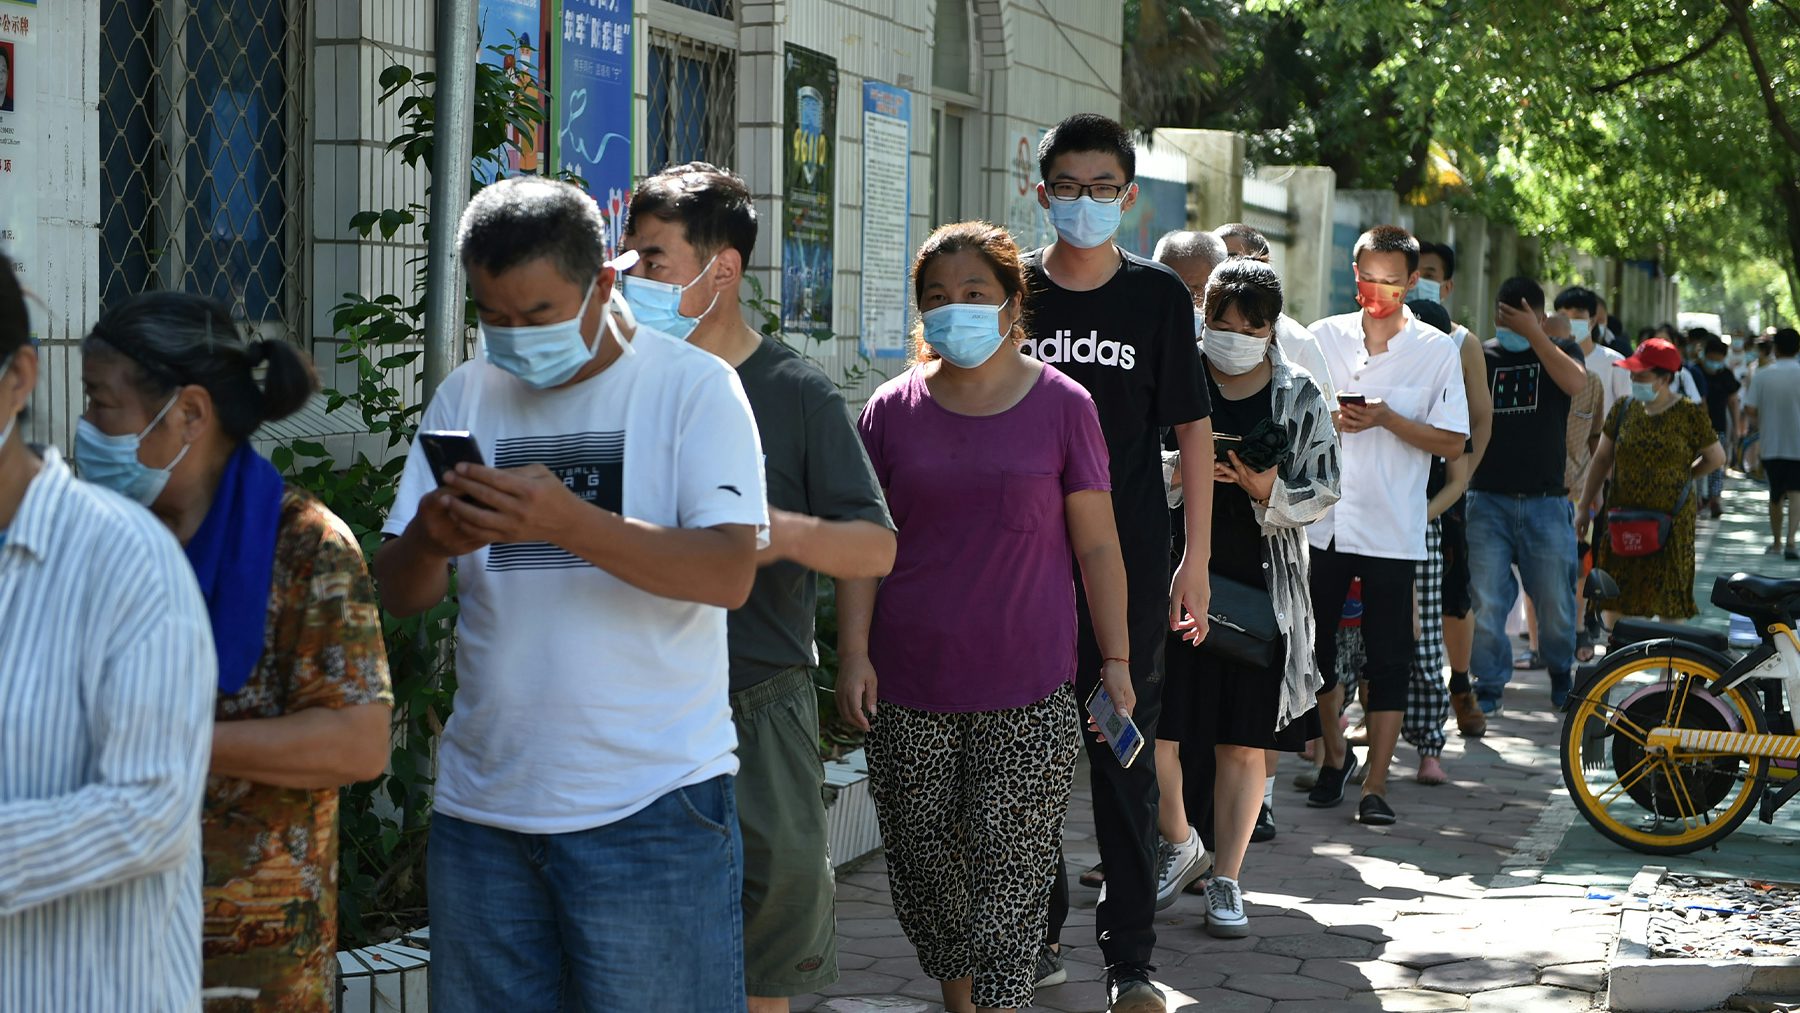 Residents line up for the sixth round of Covid-19 tests since late July in Nanjing. Getty Images.